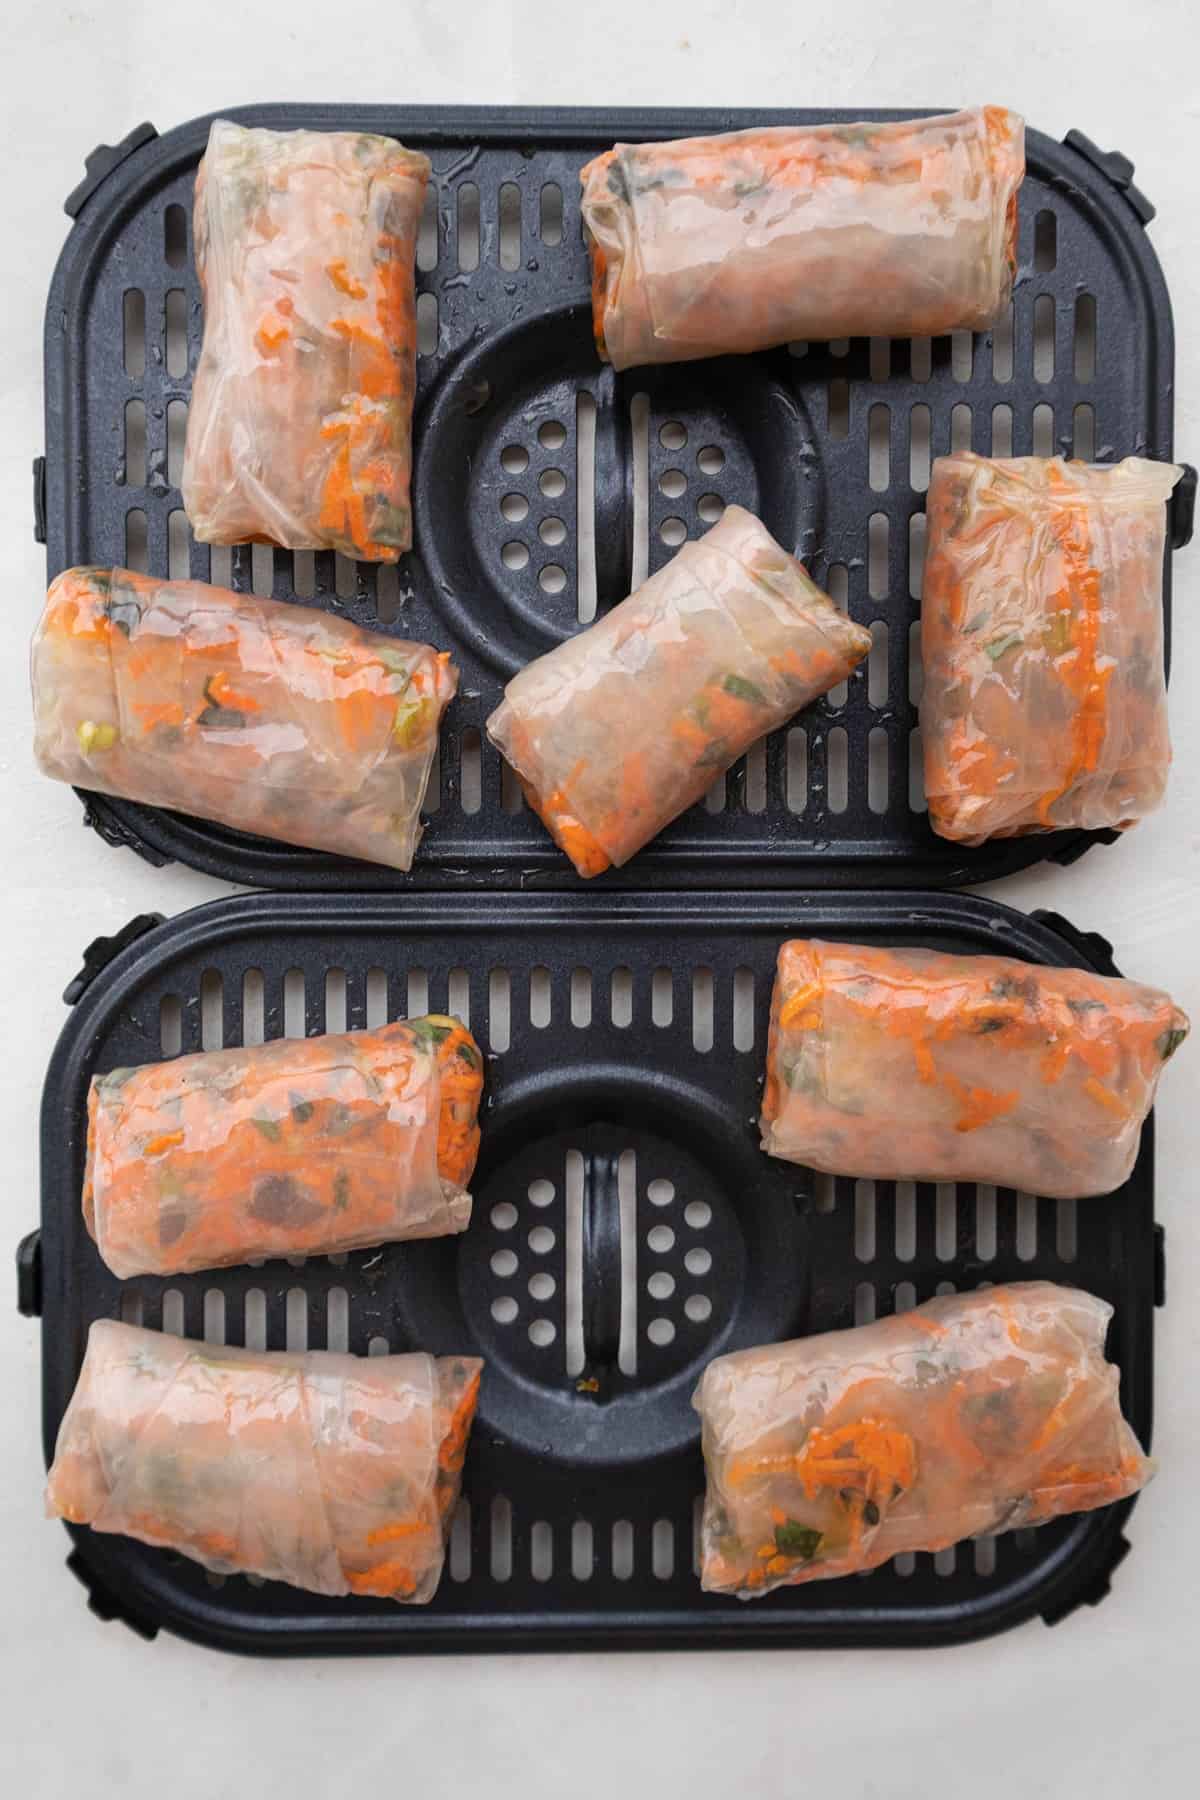 Rice paper rolls brushed with olive oil on air fryer tray